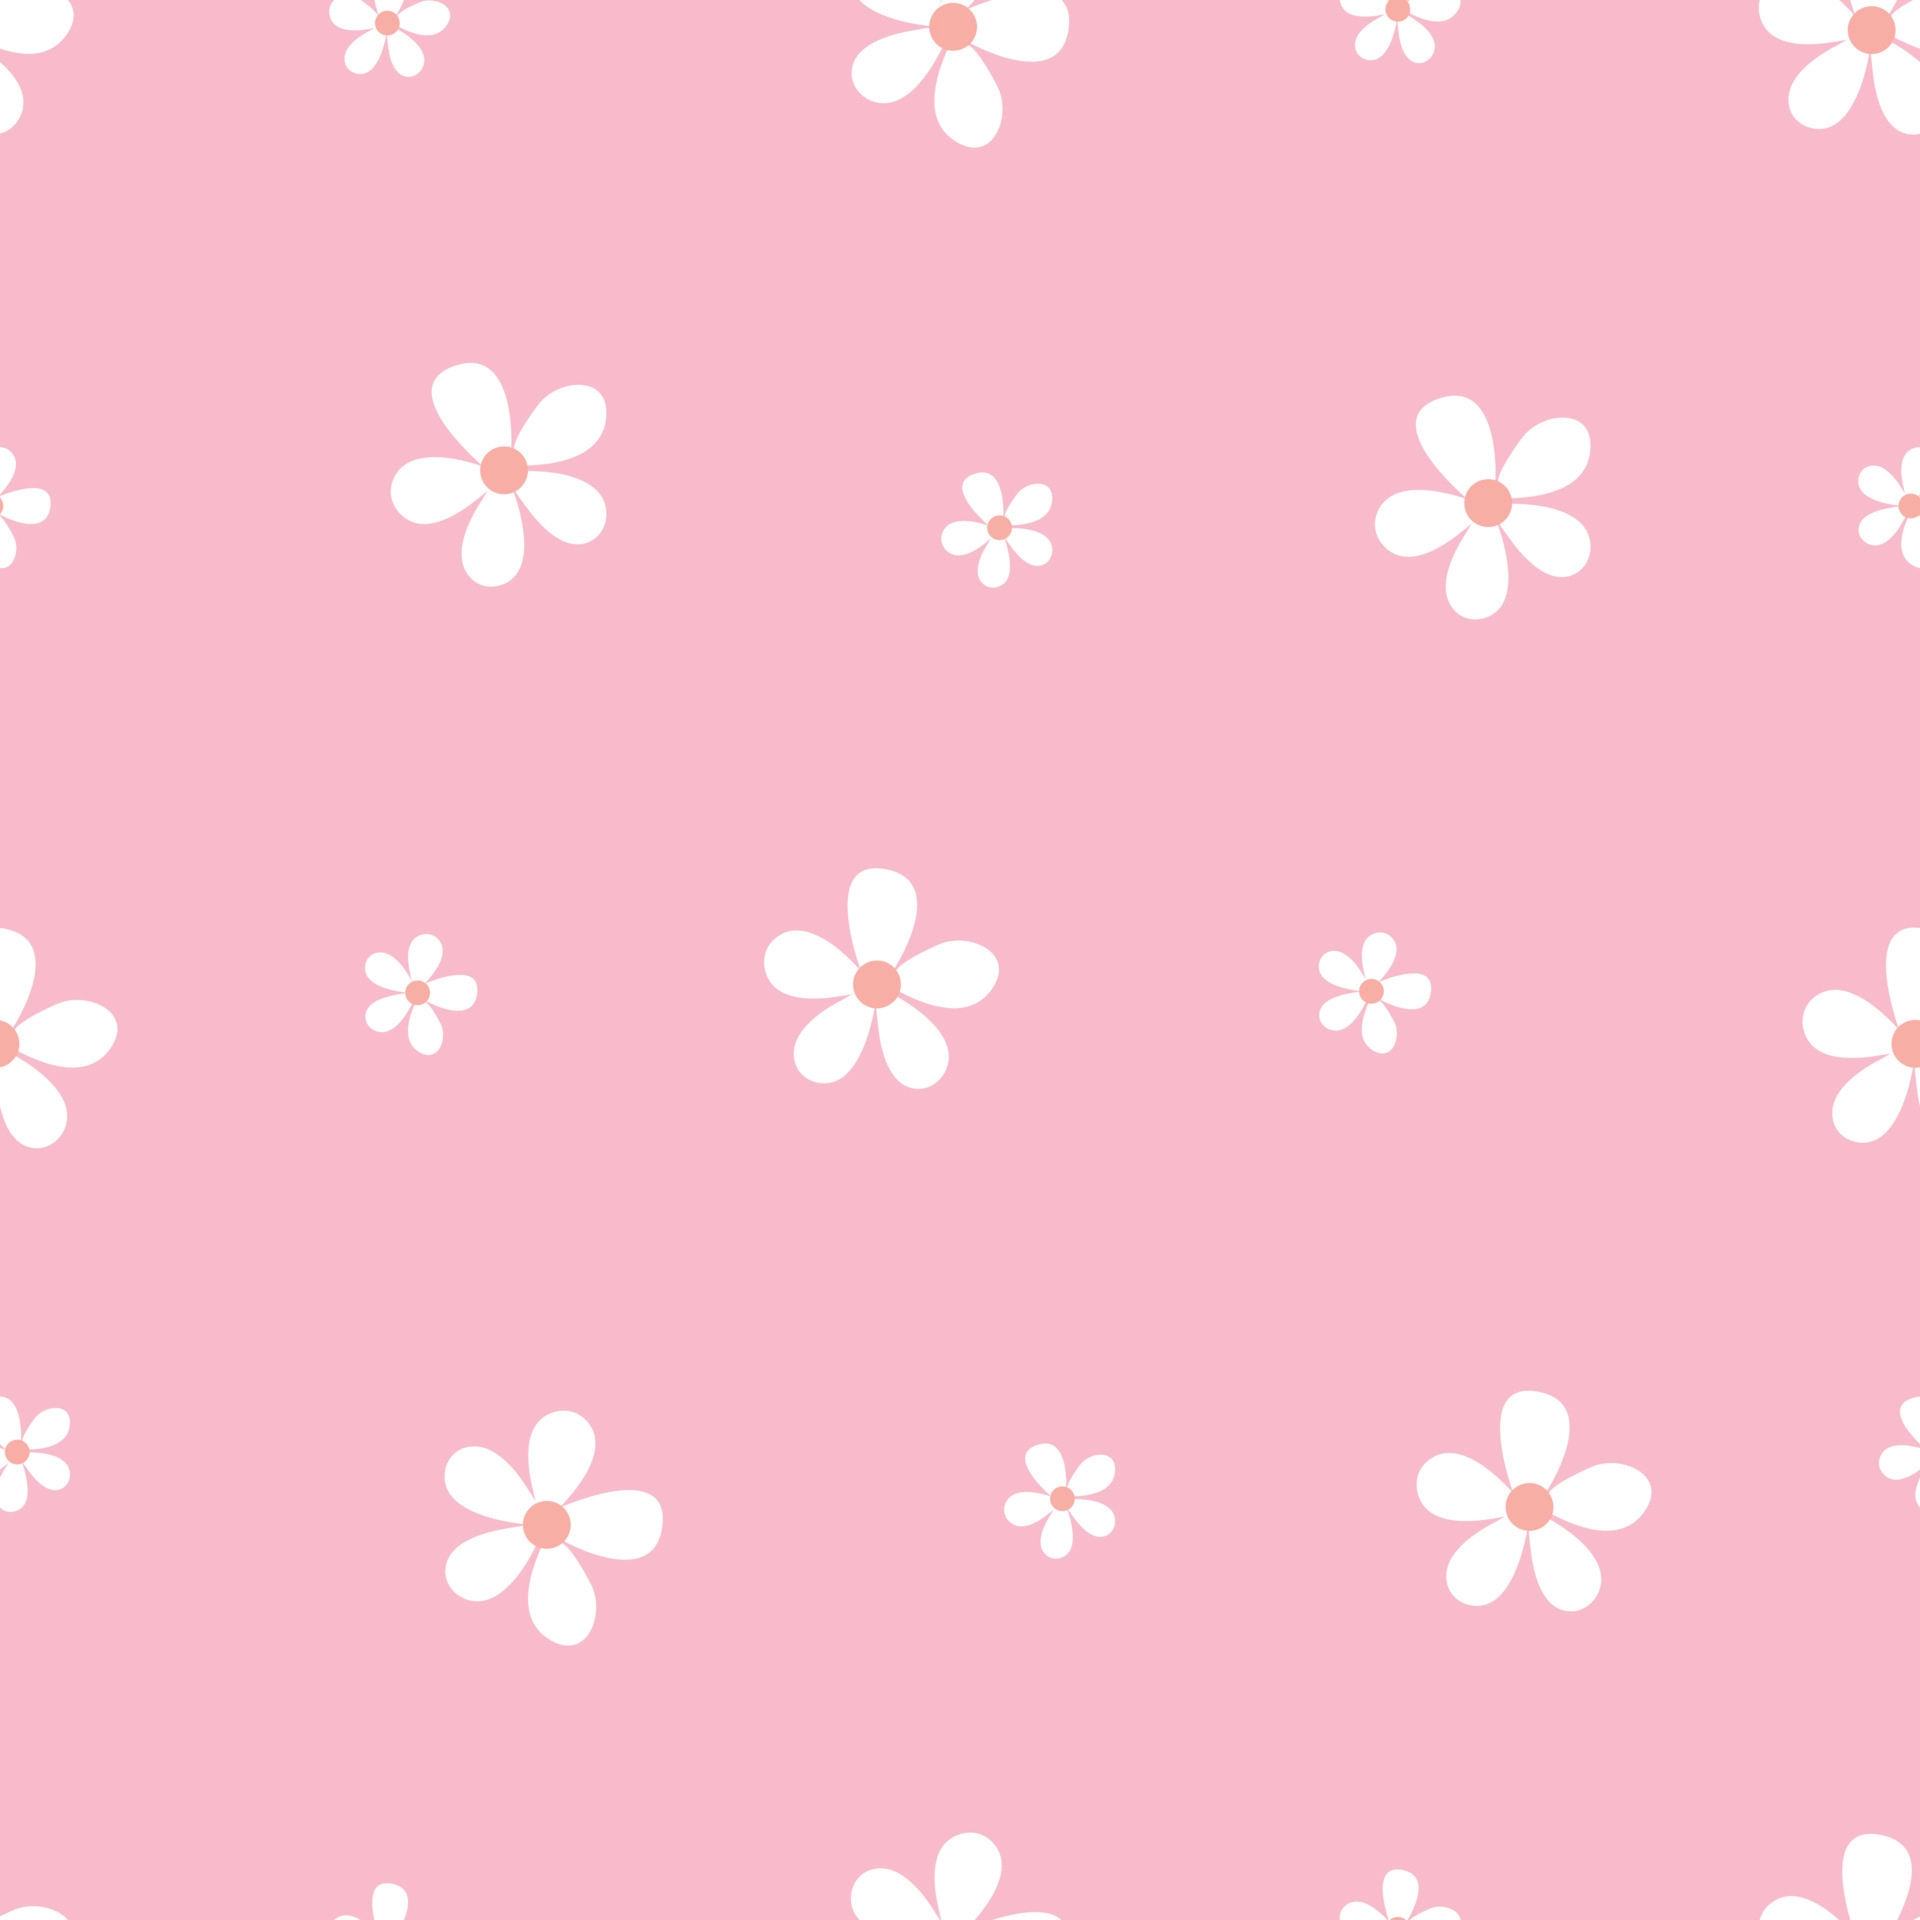 1920x1920 Seamless vector White flower pattern on pink background Hand drawn in cartoon style, use for prints, wallpaper, fashion fabrics, textiles. 4552681 Vector Art